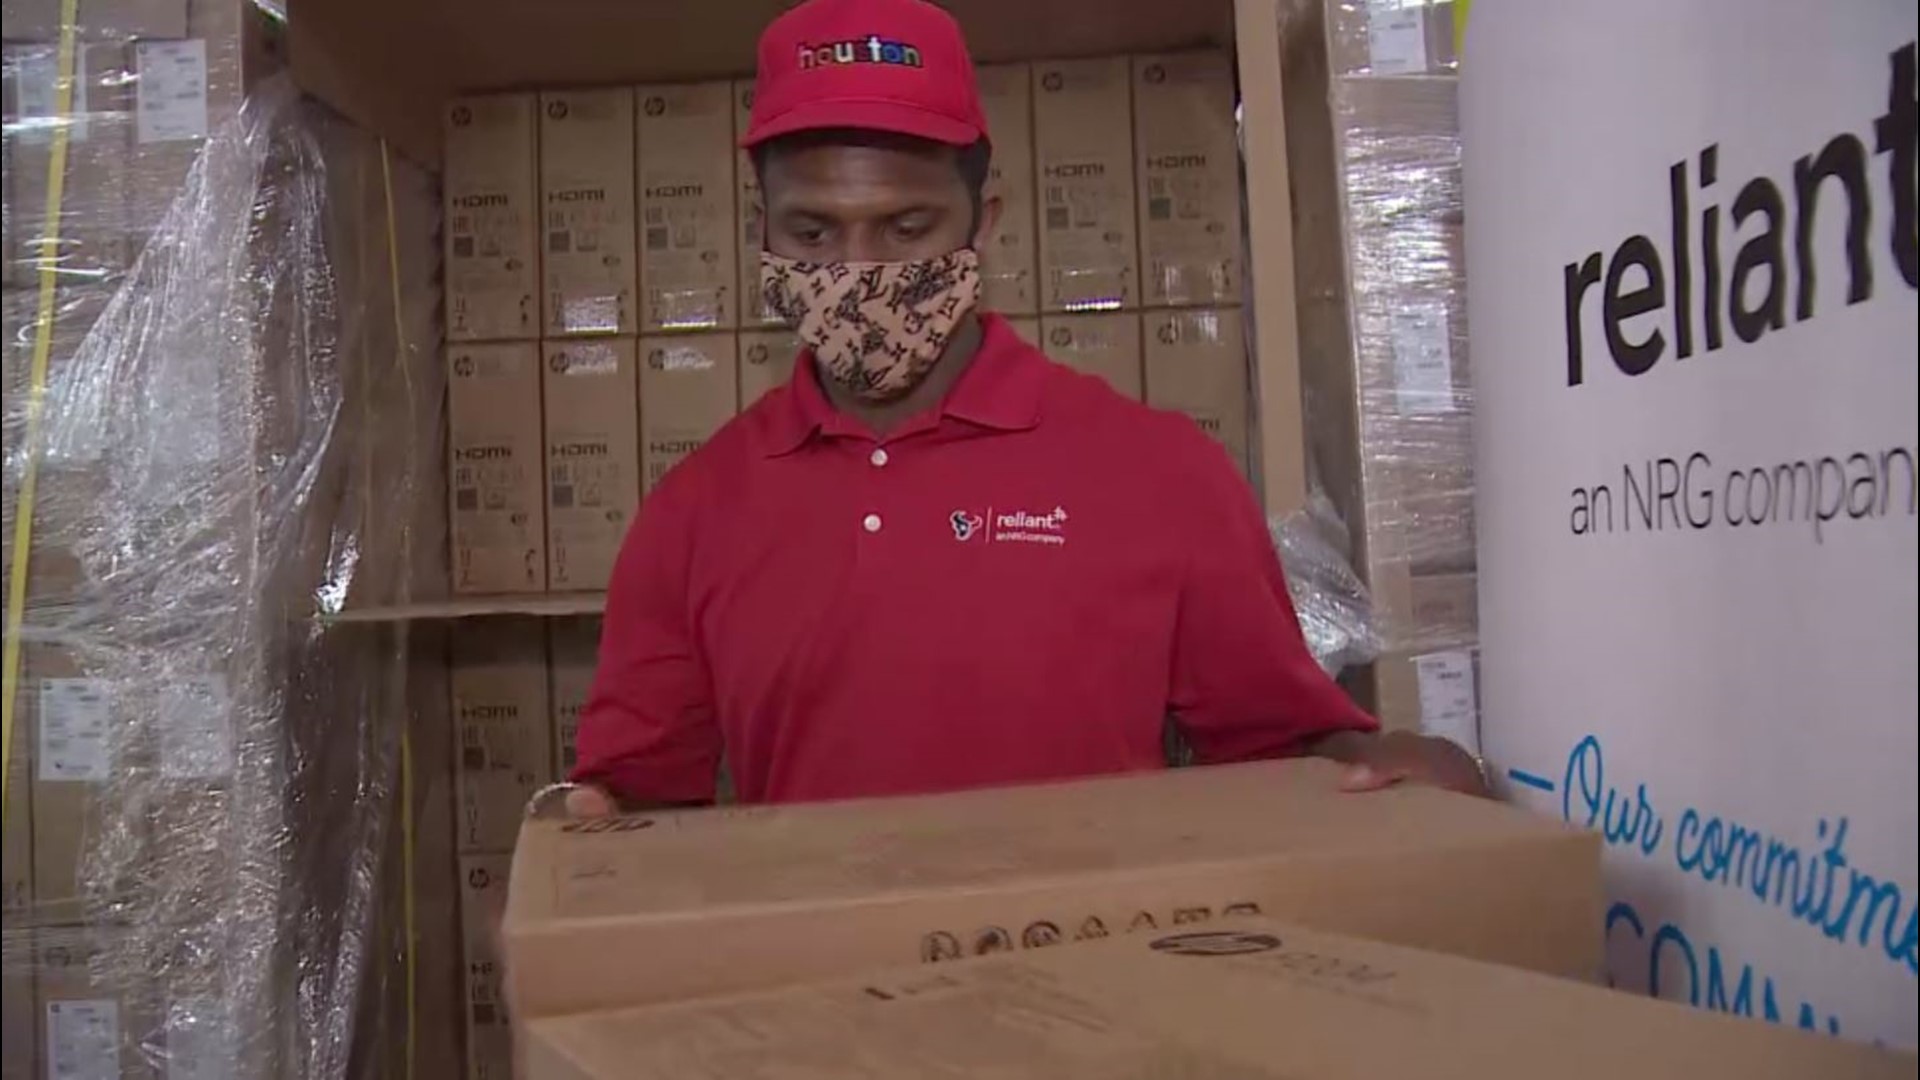 Houston Texans Deshaun Watson shuffled through boxes of computers— in a rare move – keeping out of the spotlight and to the sidelines of a computer giveaway.